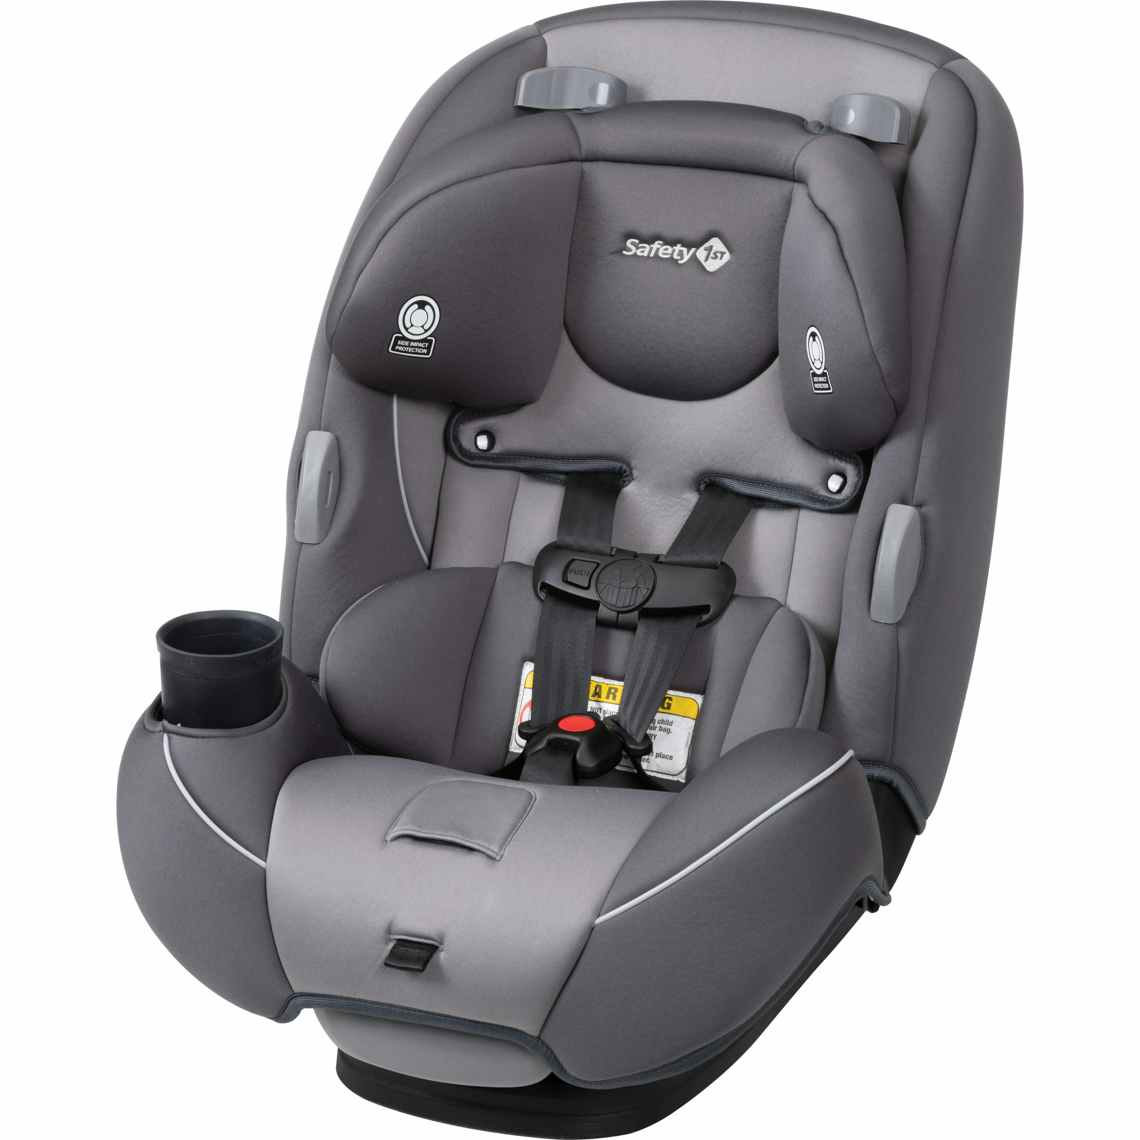 stock photo of safety 1st car seat on white background